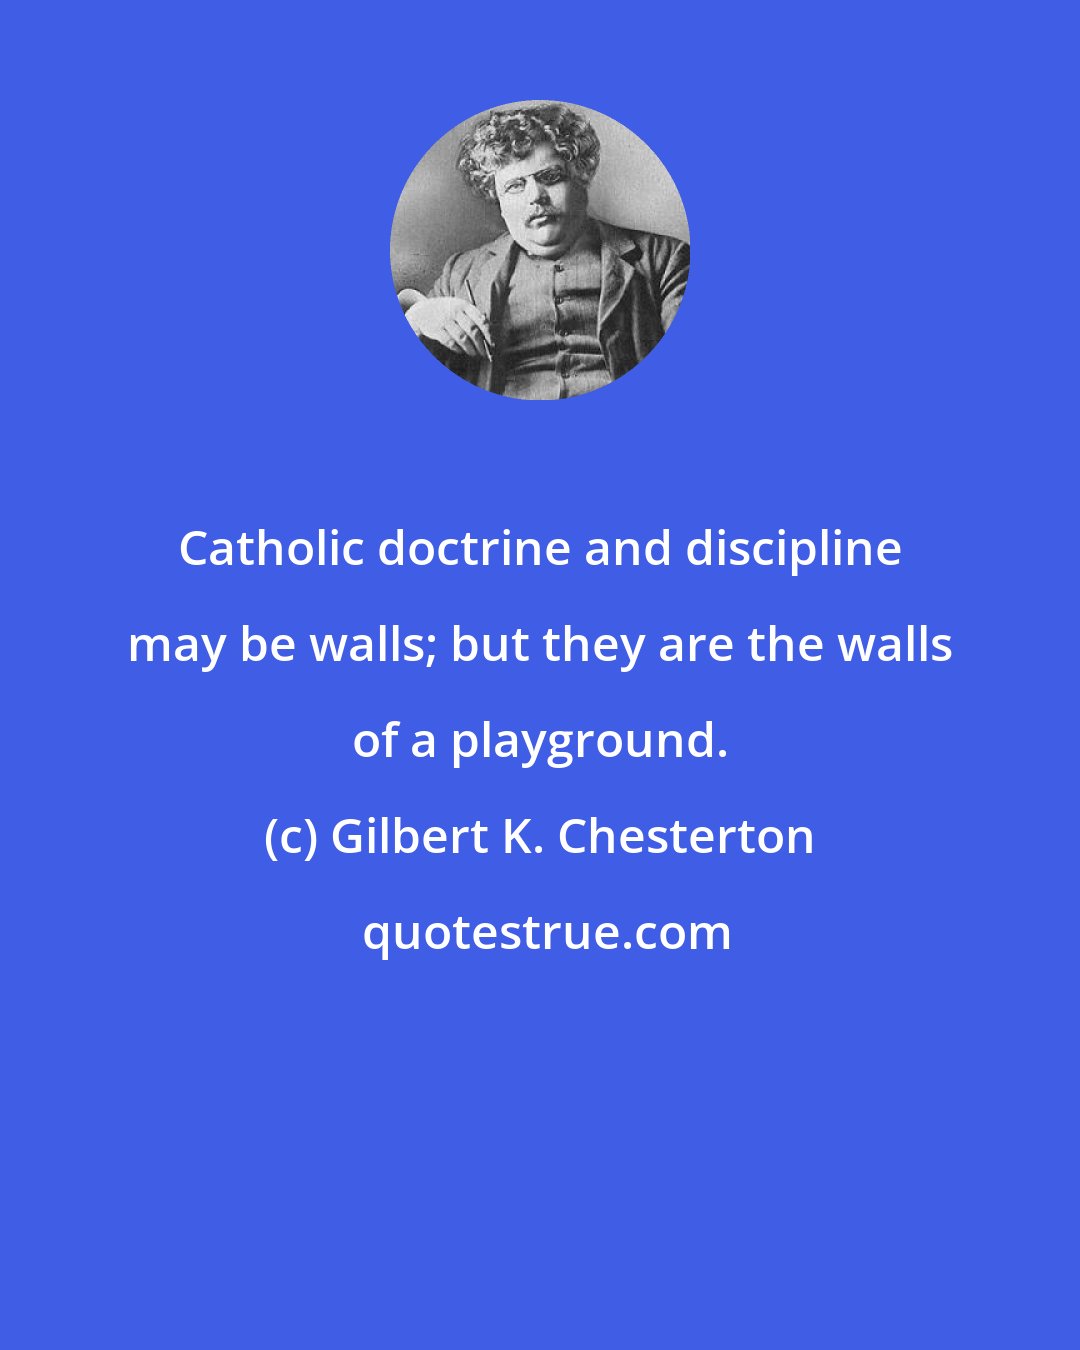 Gilbert K. Chesterton: Catholic doctrine and discipline may be walls; but they are the walls of a playground.